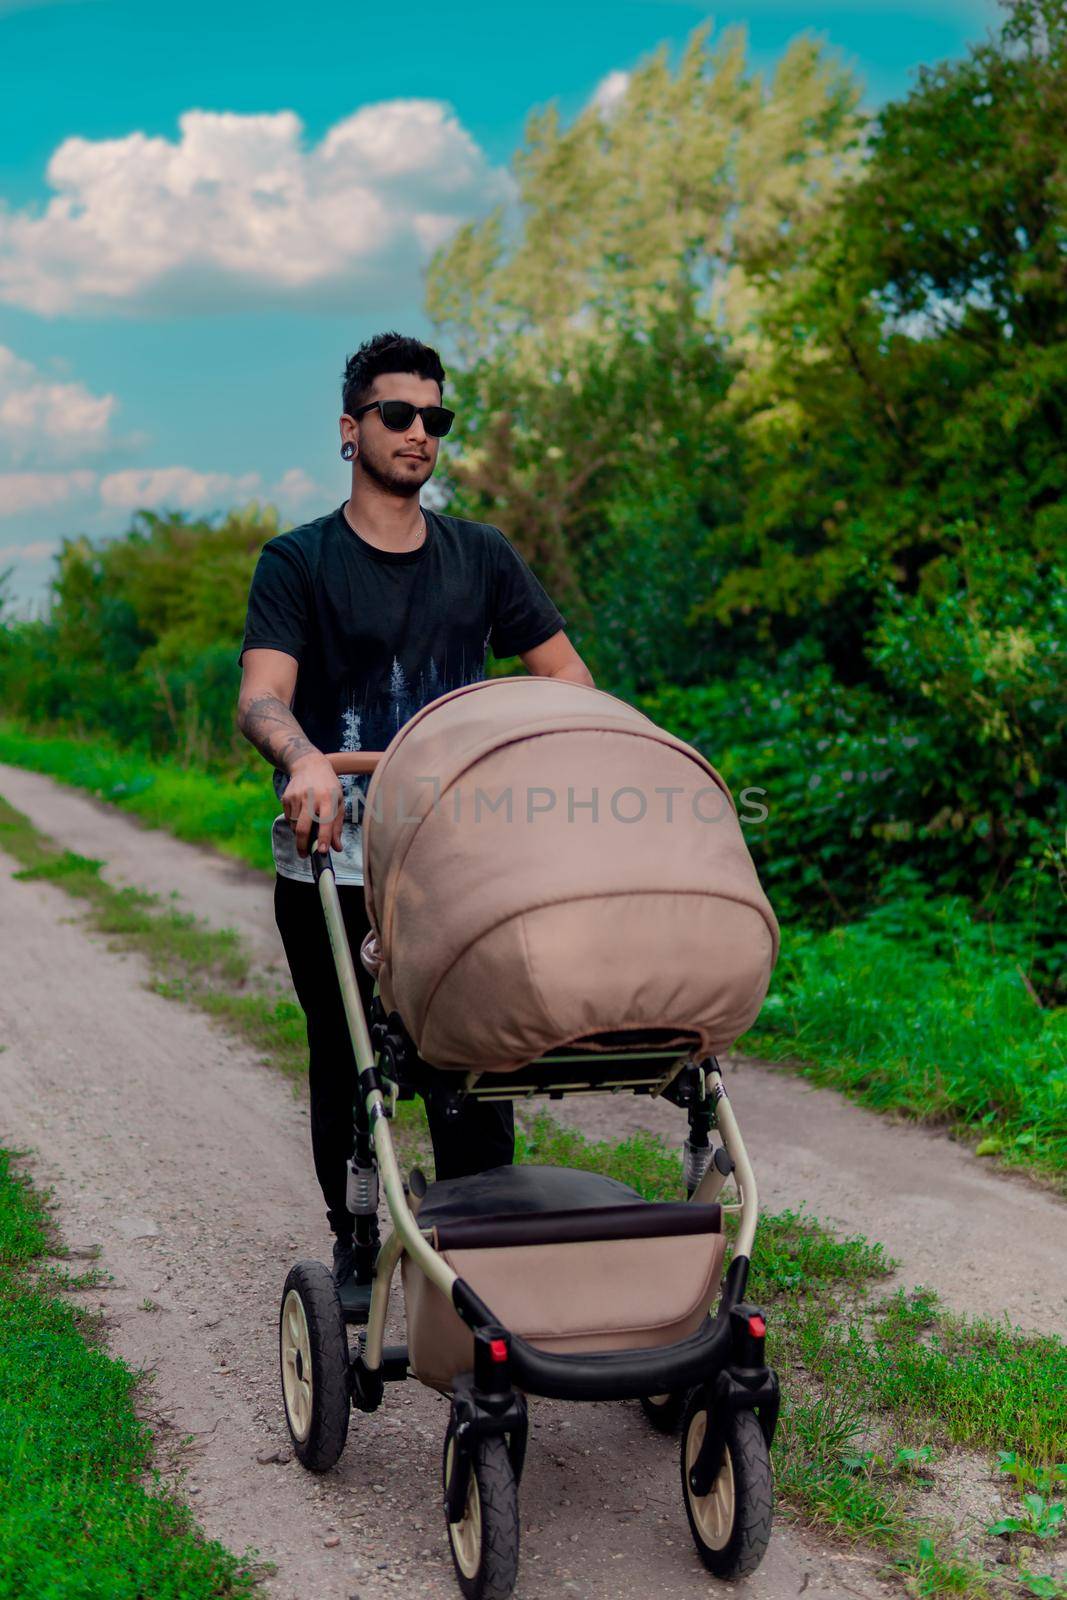 young man with stroller in the forest, summer background. High quality photo